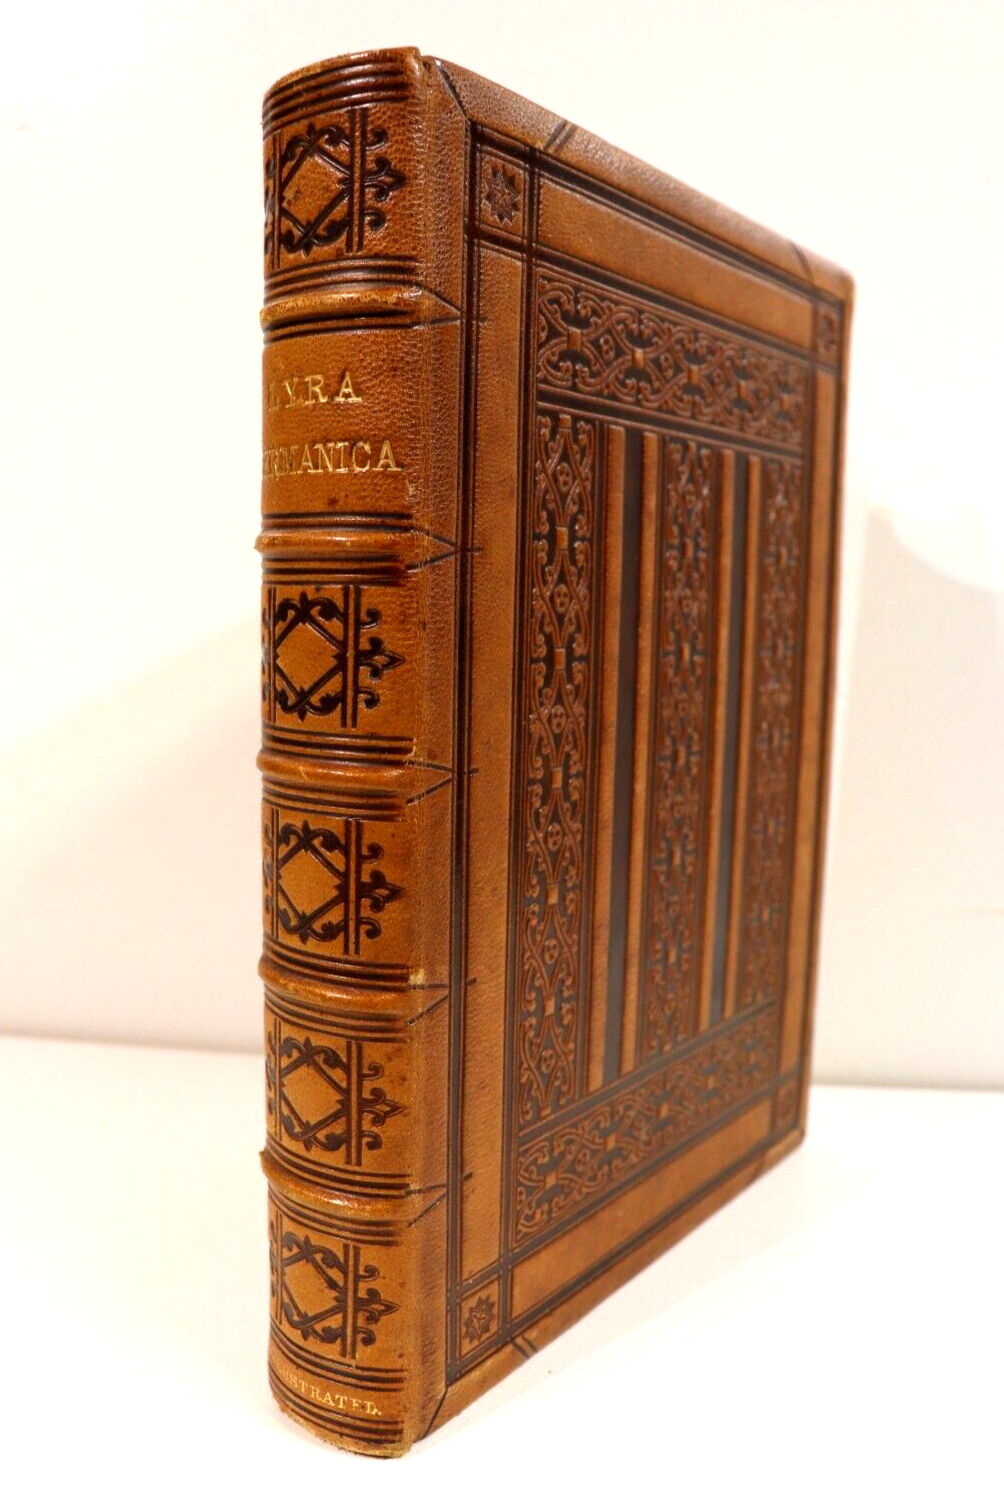 Lyra Germanica: Hymns For The Sundays - 1864 - Antique Religious Book